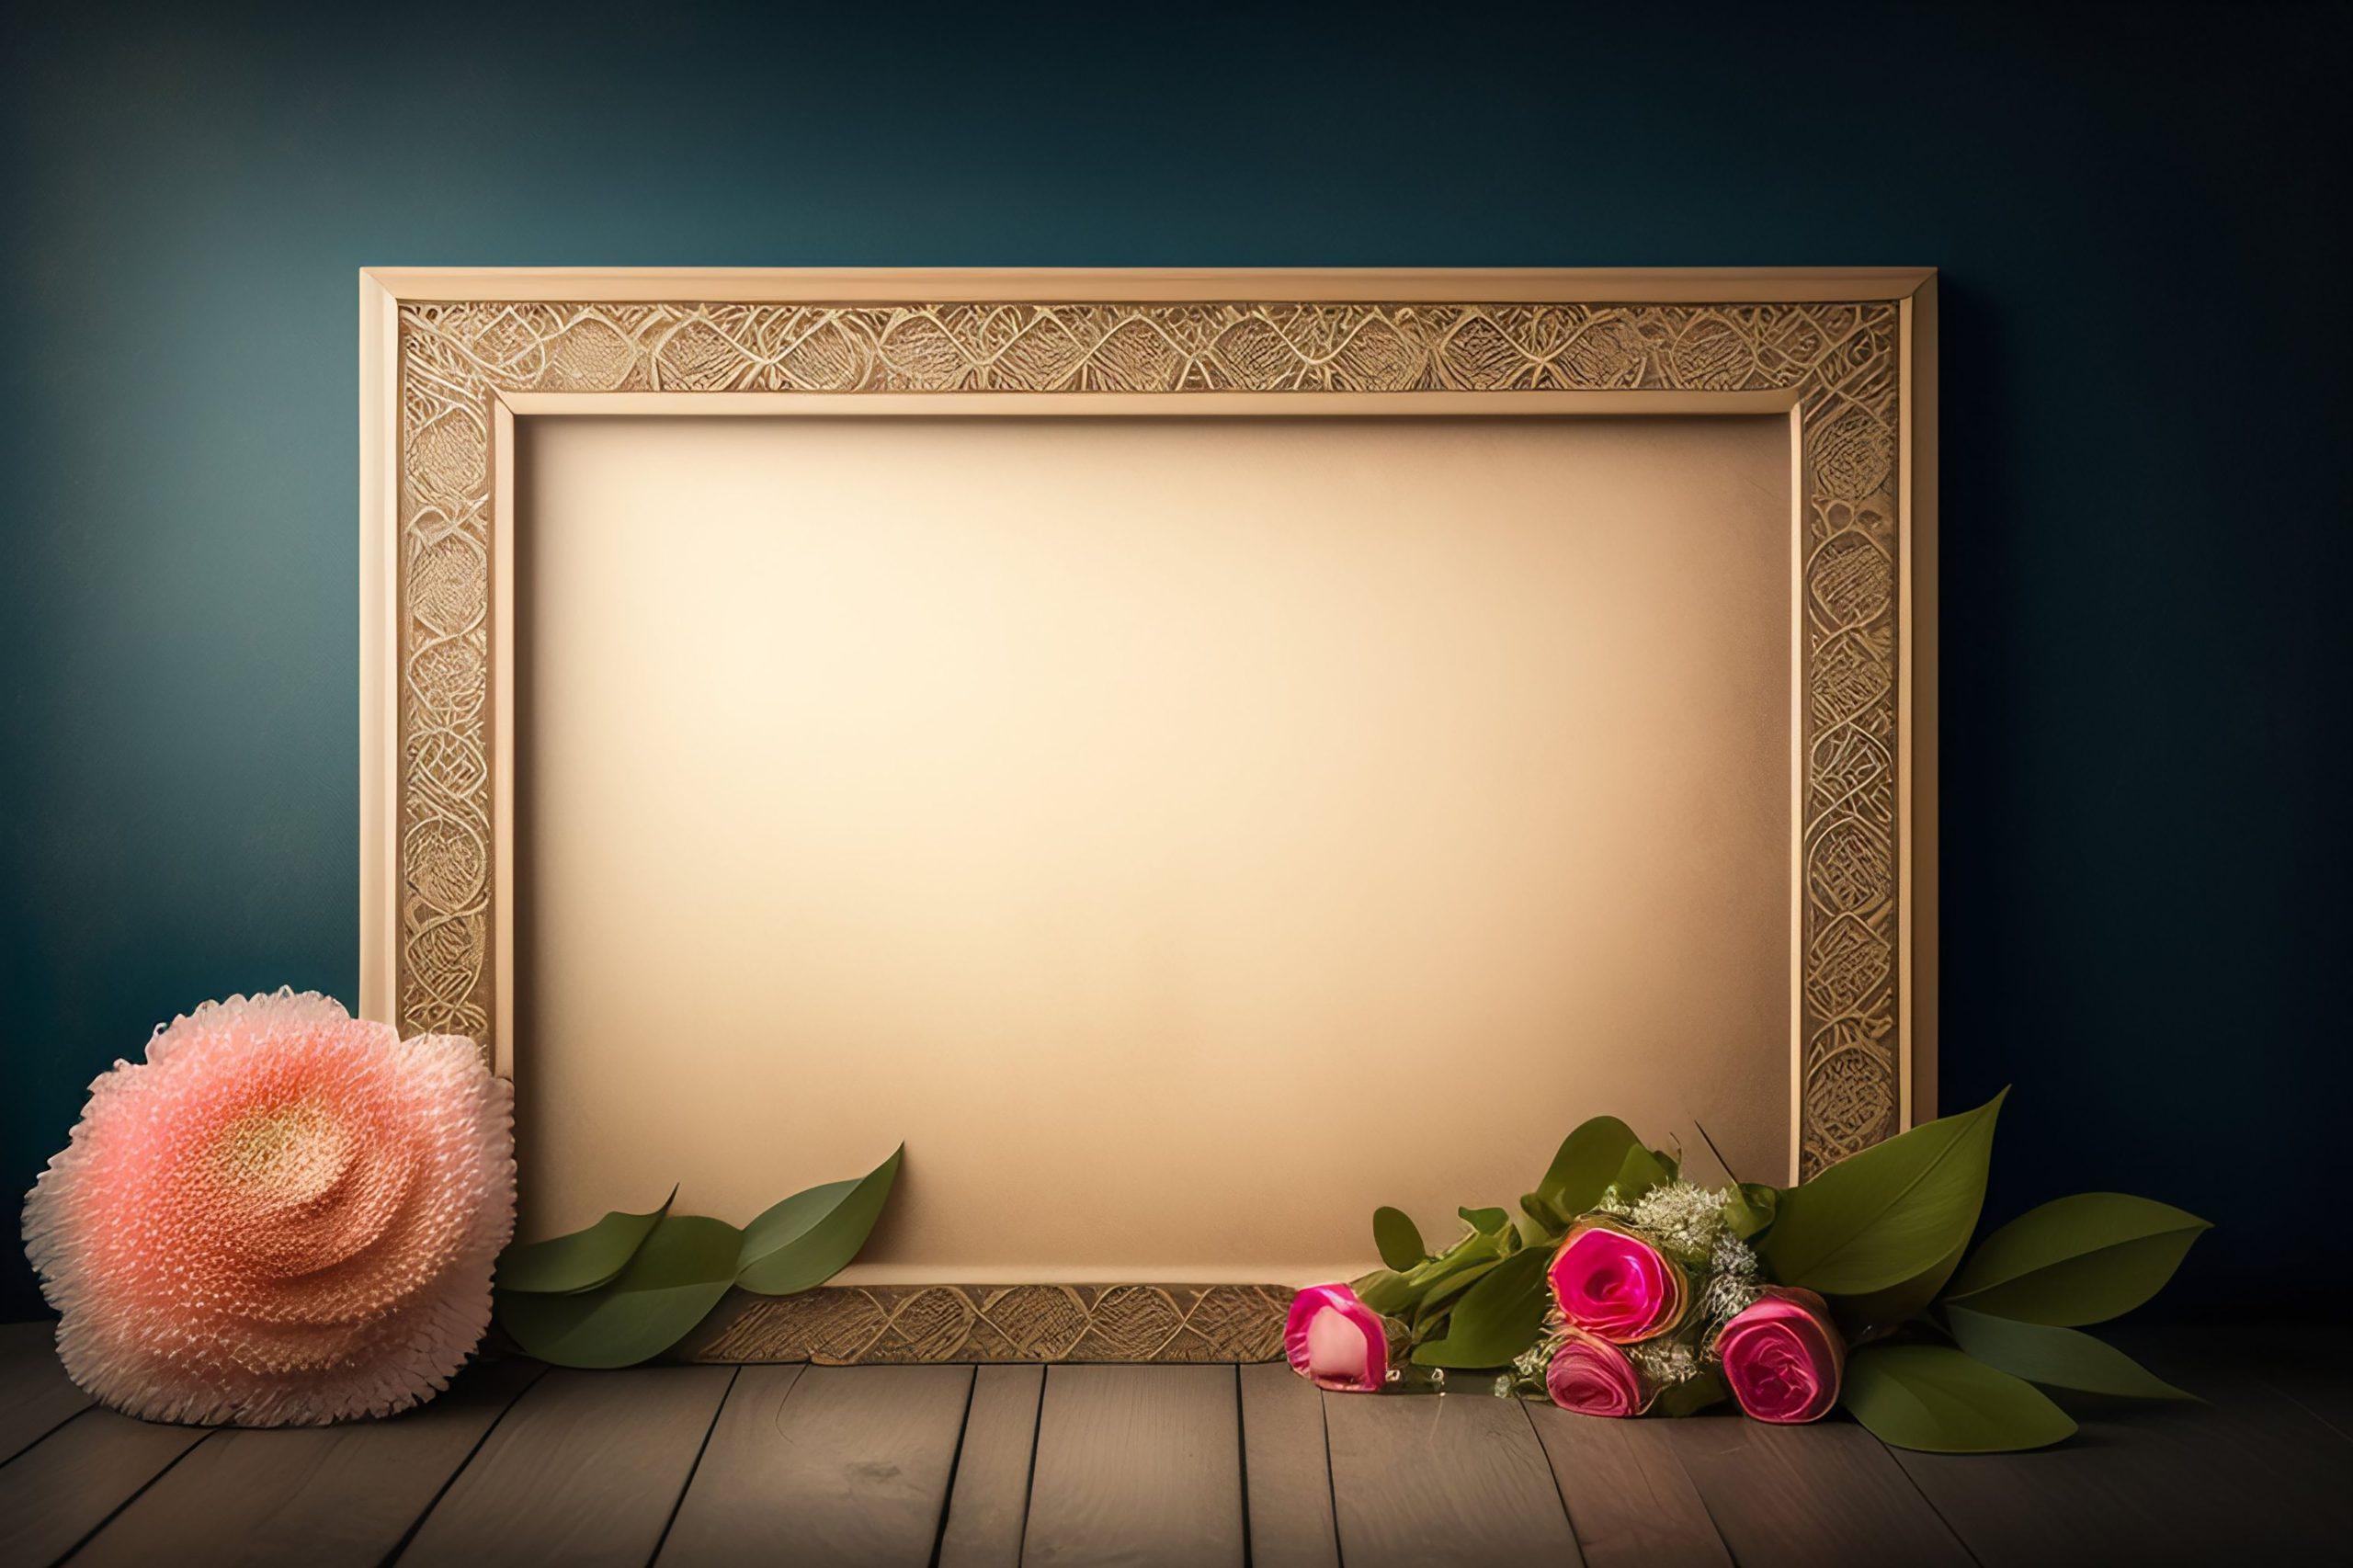 One-Stop Shop for High-Quality Photo Frames